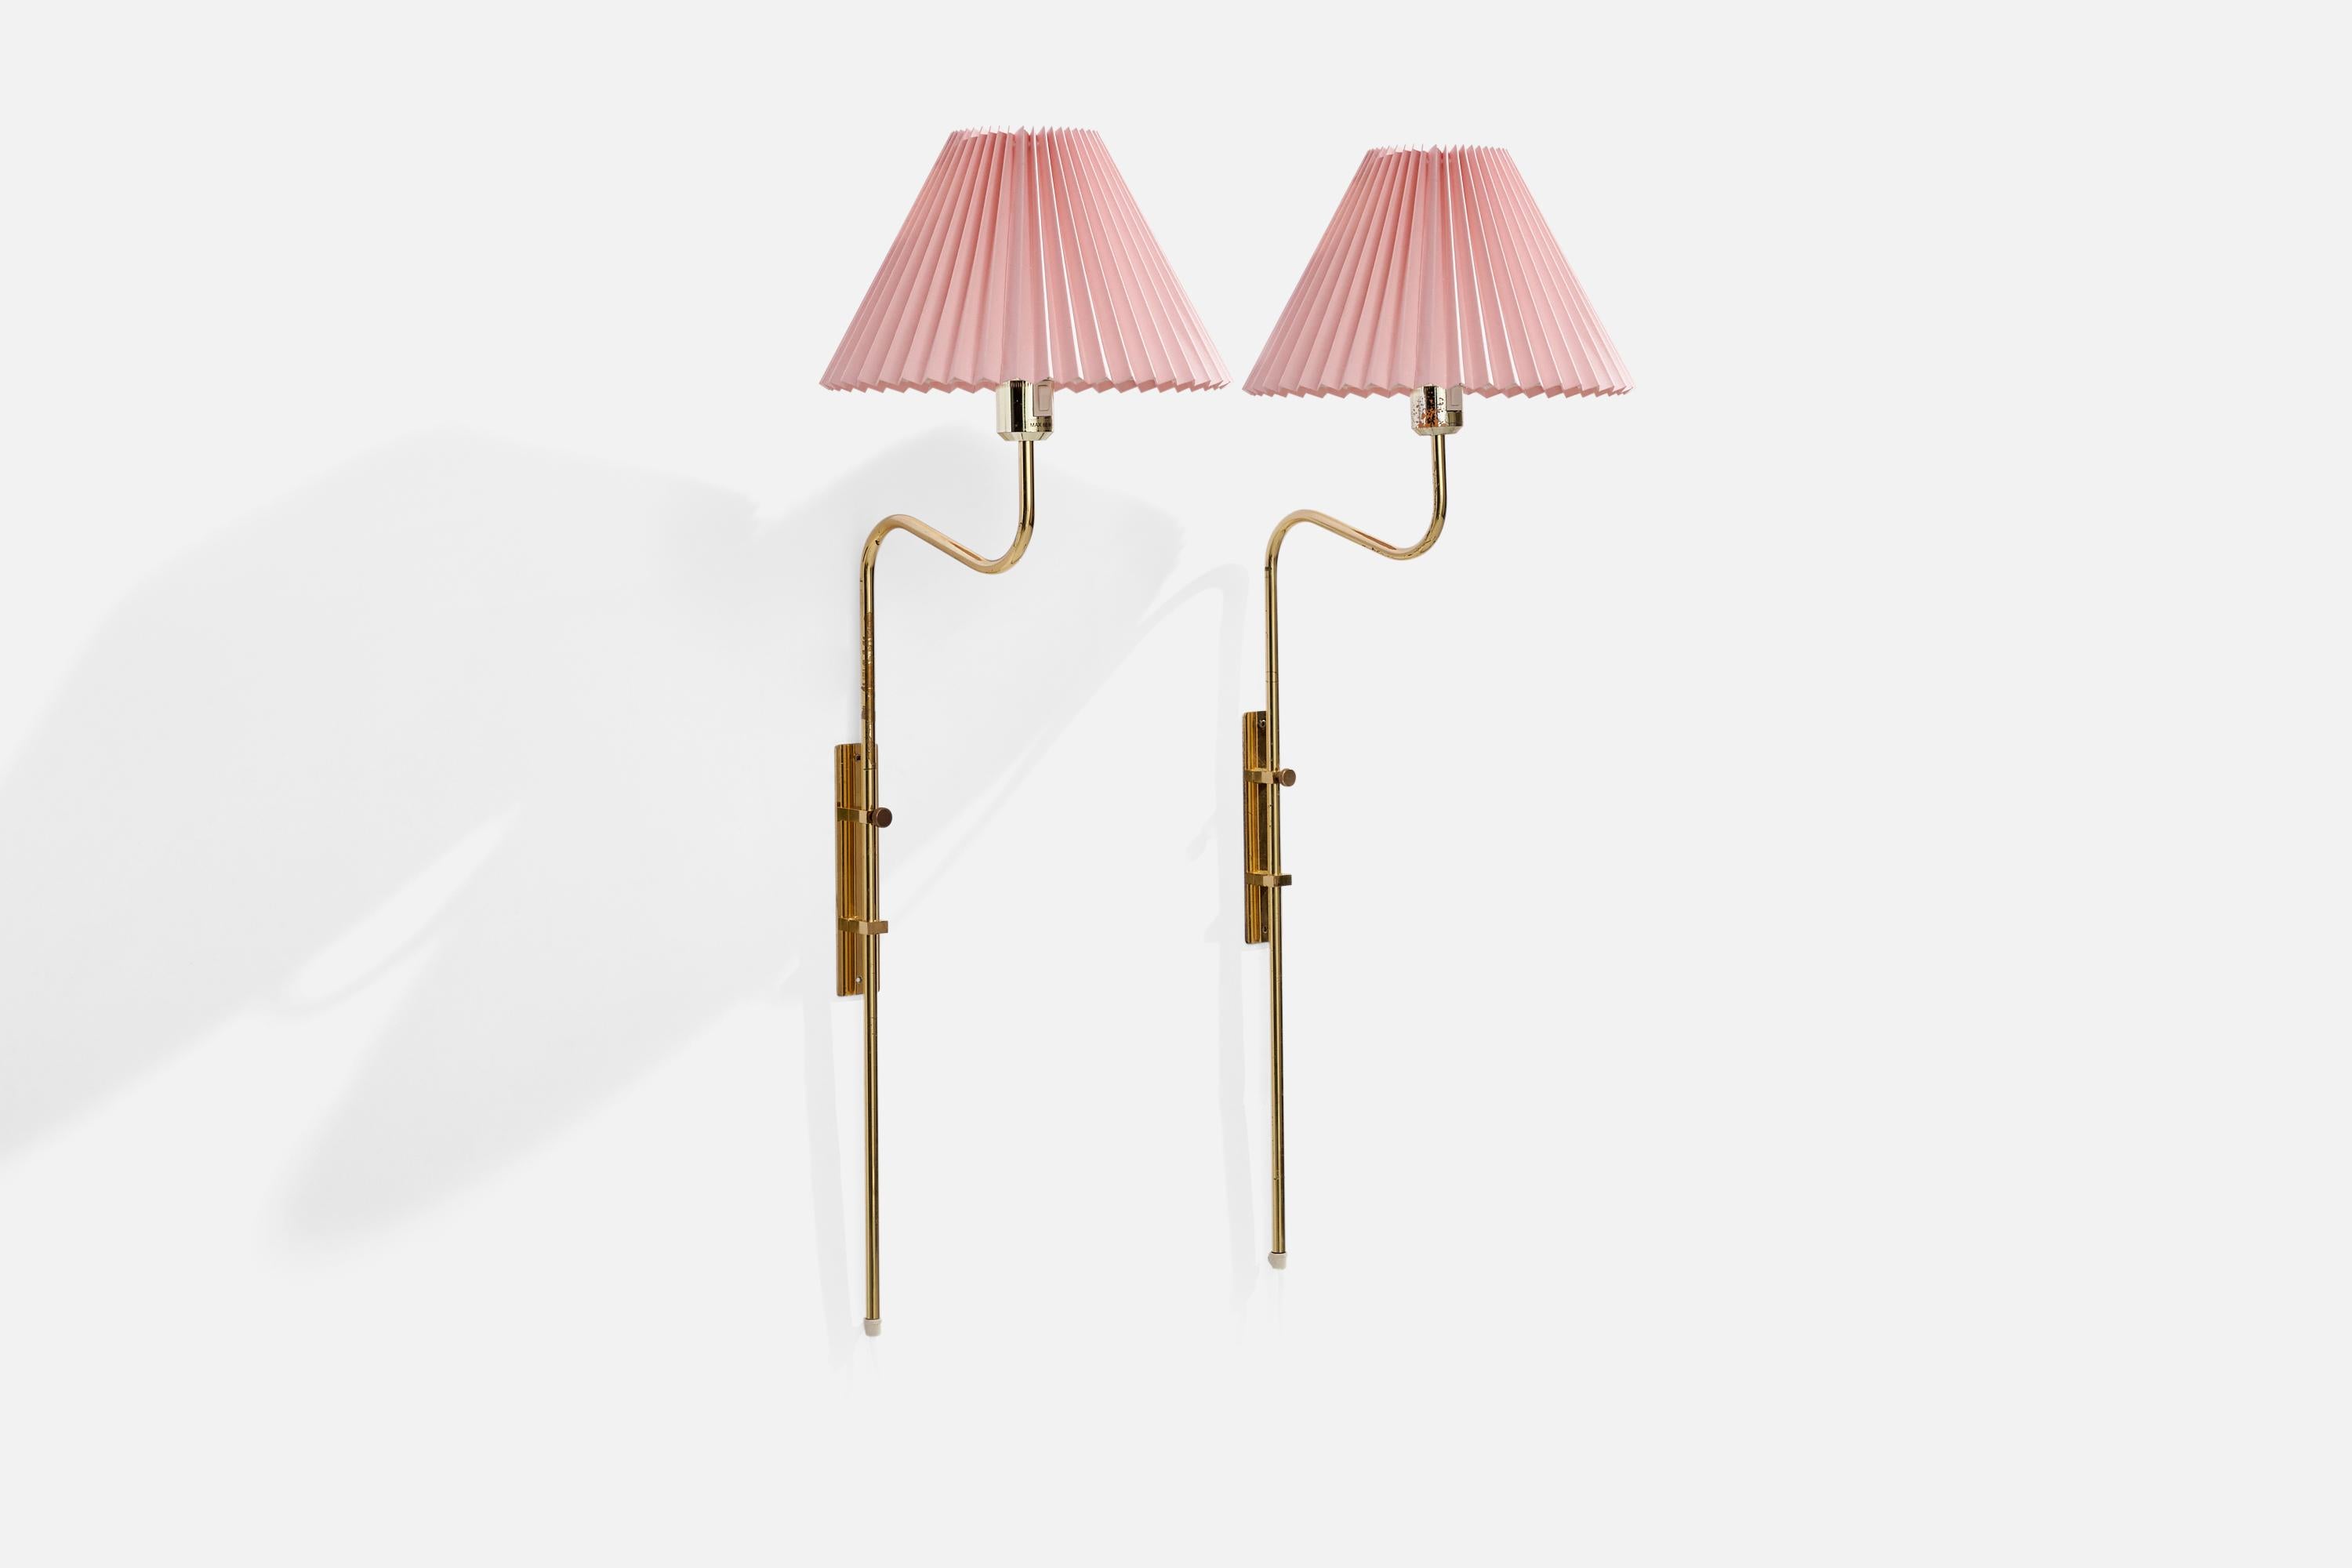 A pair of adjustable brass and pink paper wall lights designed and produced in by Örsjö Industri, Sweden, c. 1970s.

Please note lamps function via plug in, with cords feeding from bottom of stems.

Overall Dimensions (inches): 37” H x 12” W x